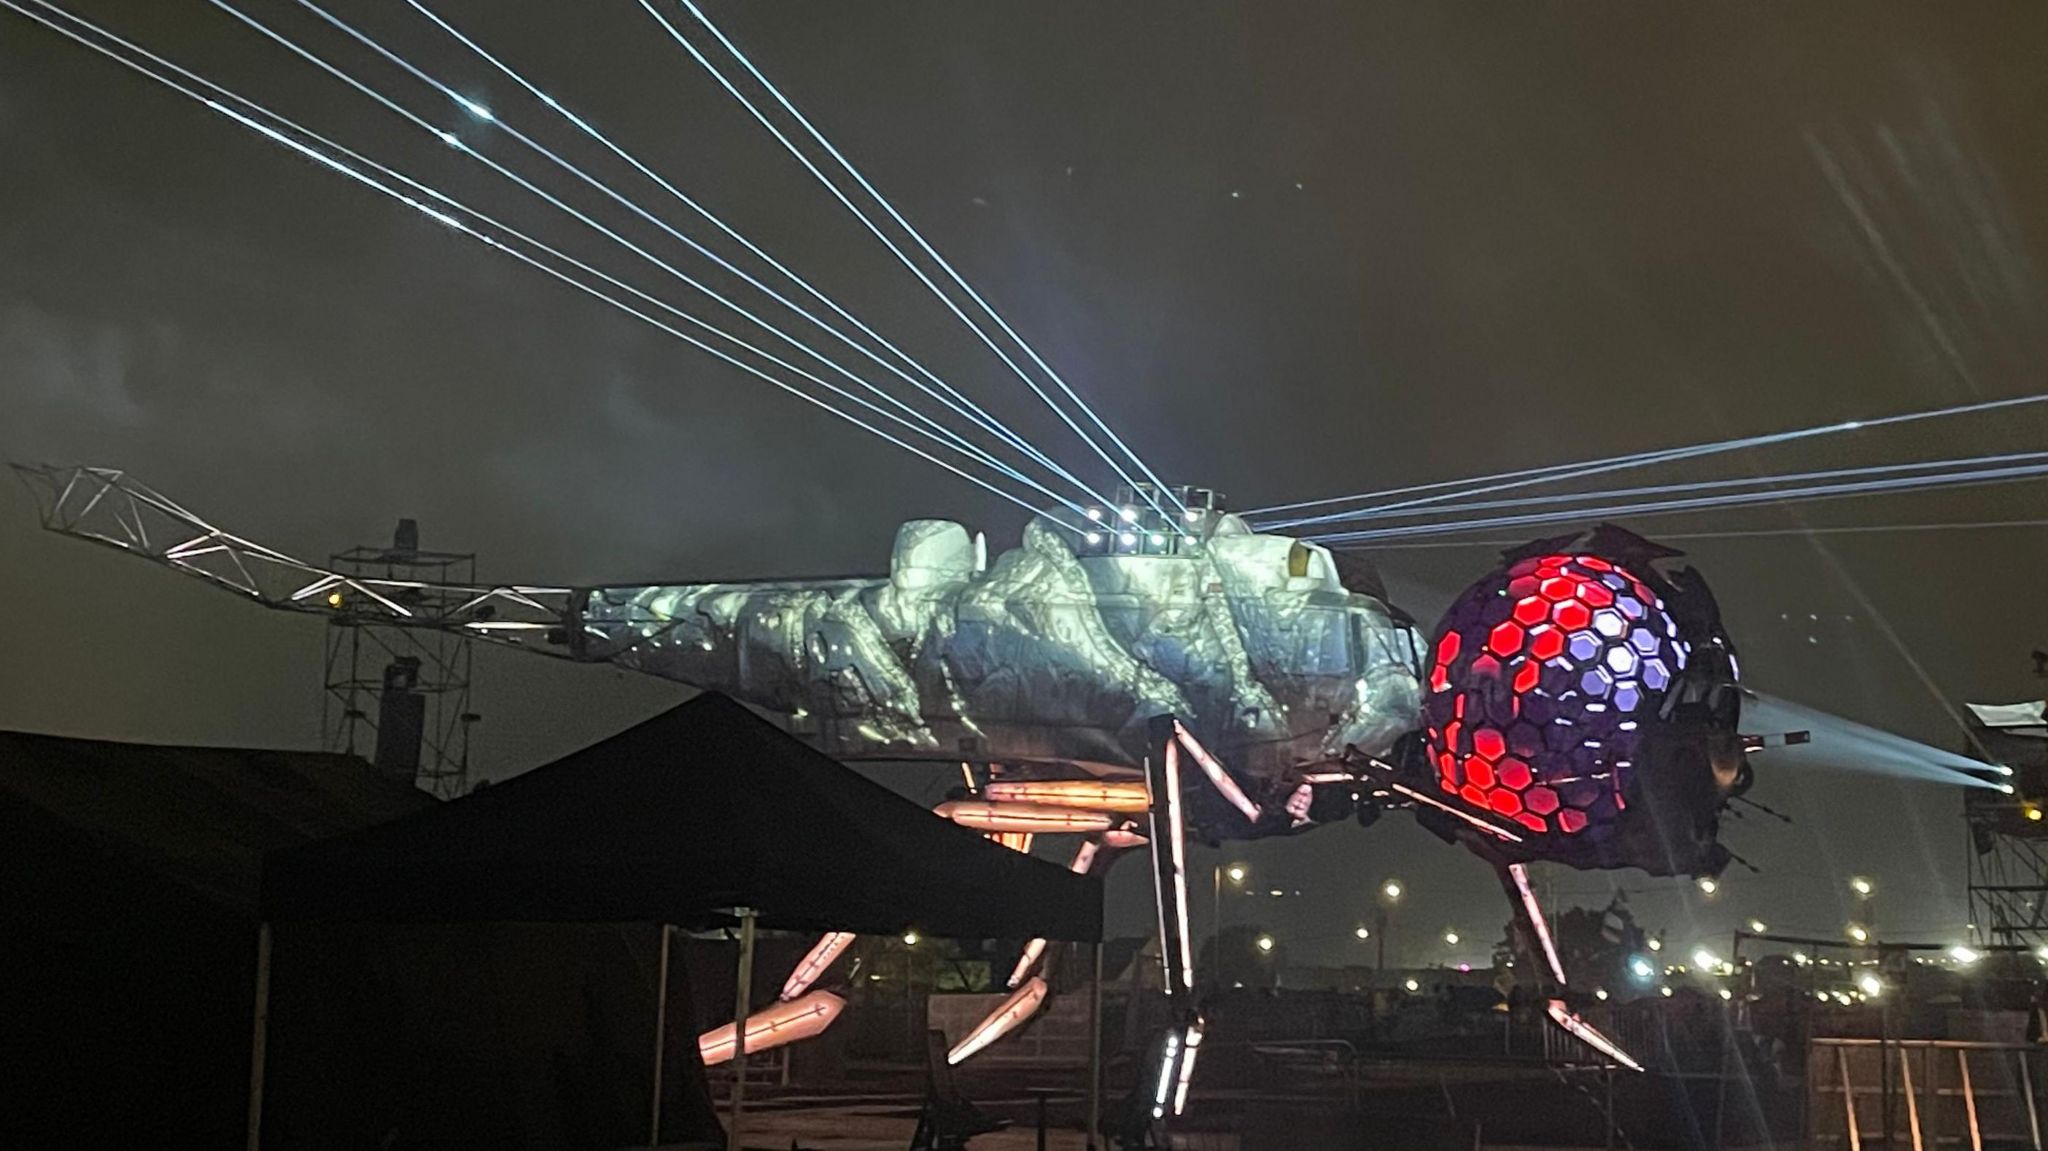 The mechanical Dragonfly sculpture lit-up at night in silver and red colours.